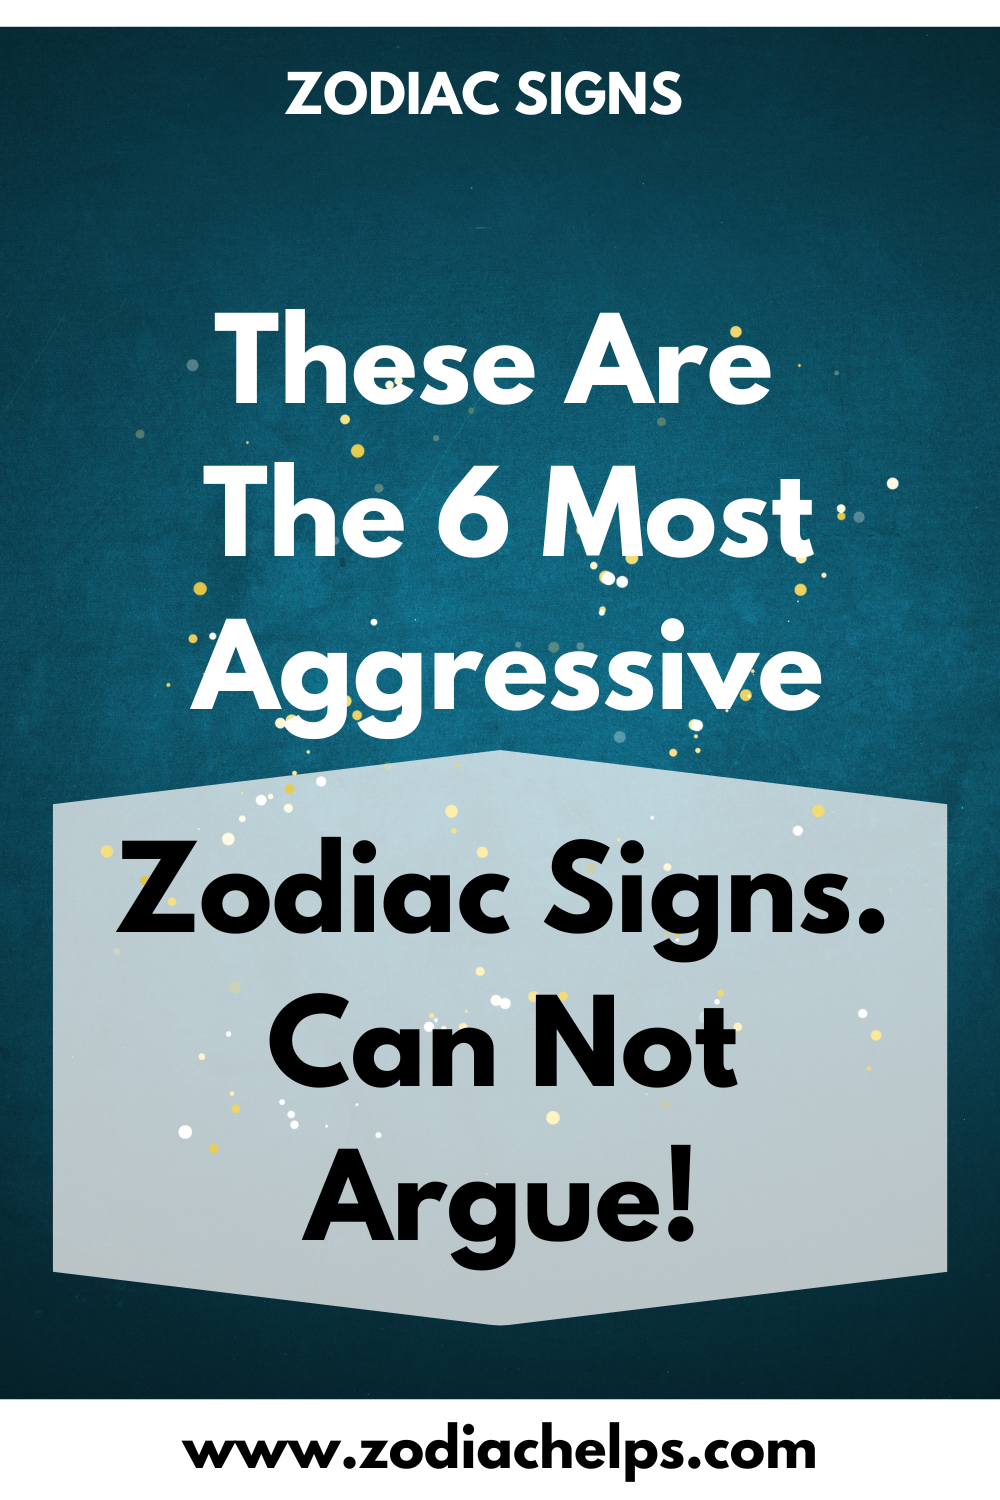 These Are The 6 Most Aggressive Zodiac Signs. Can Not Argue!